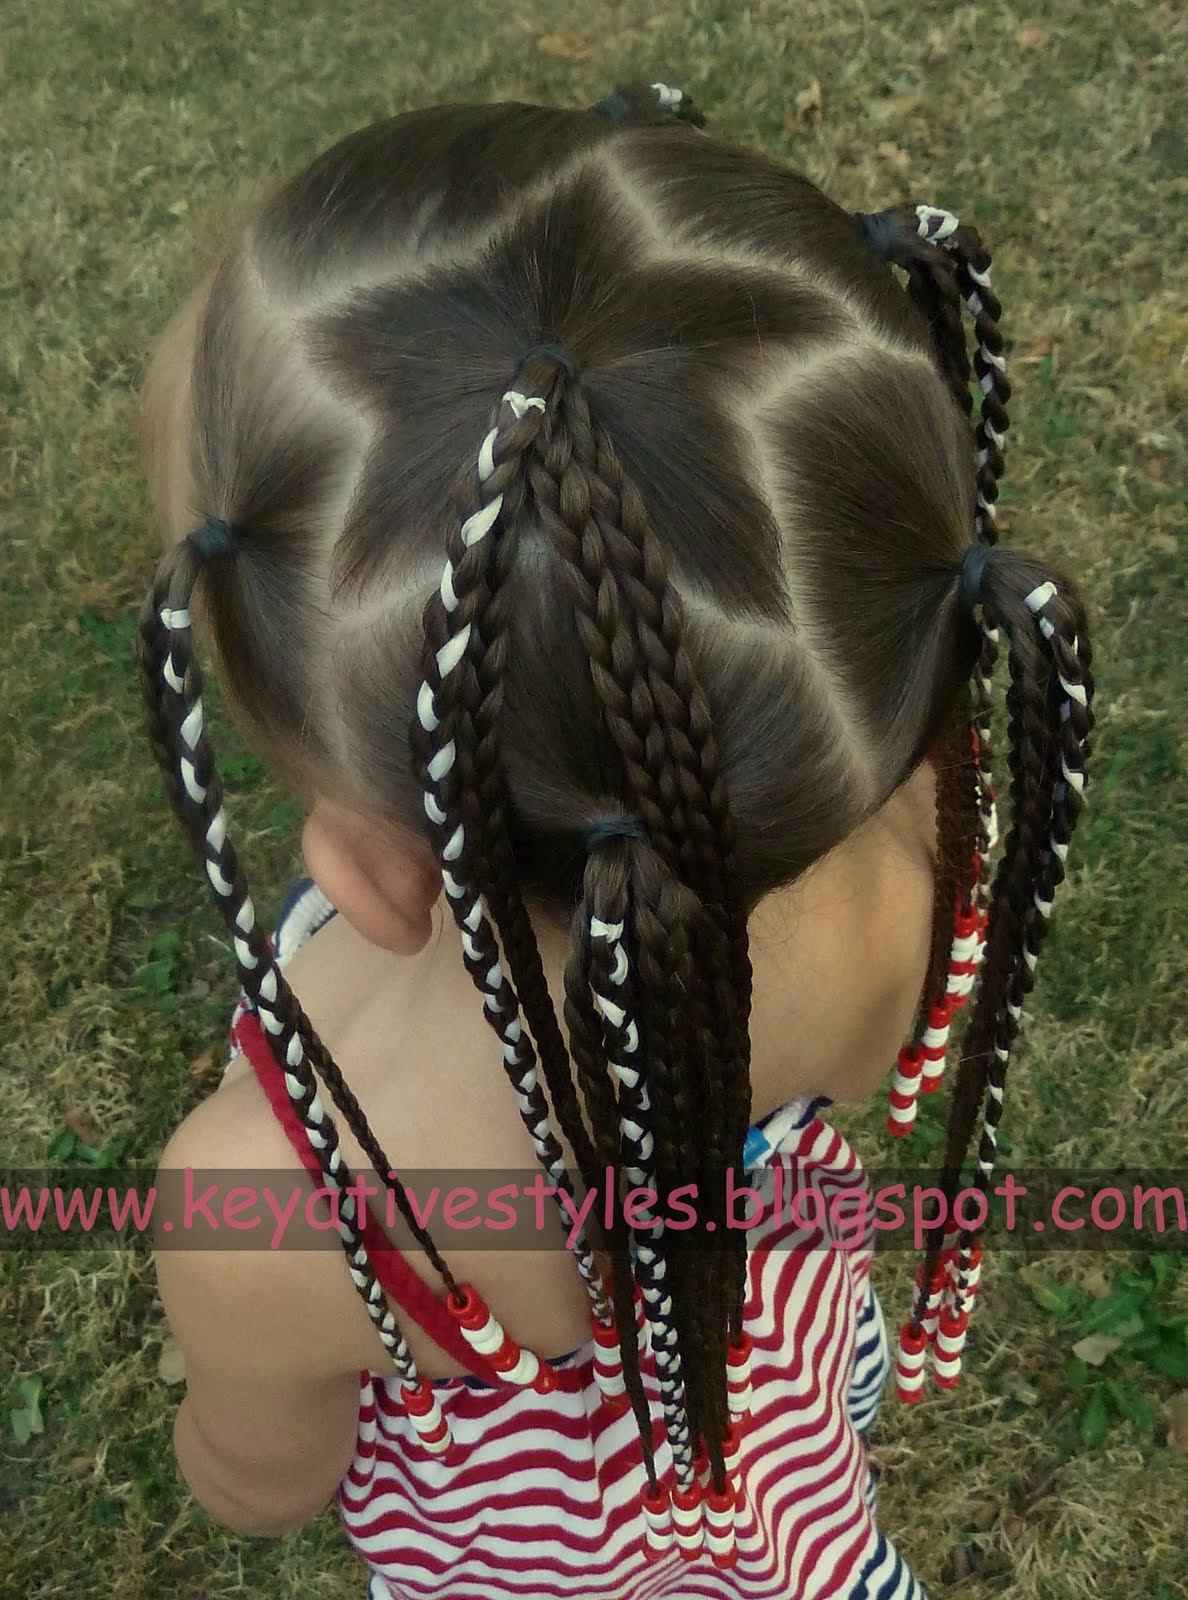 Hair And Fashion 9 11 REMEMBRANCE STAR PART RIBBON BRAIDS WITH